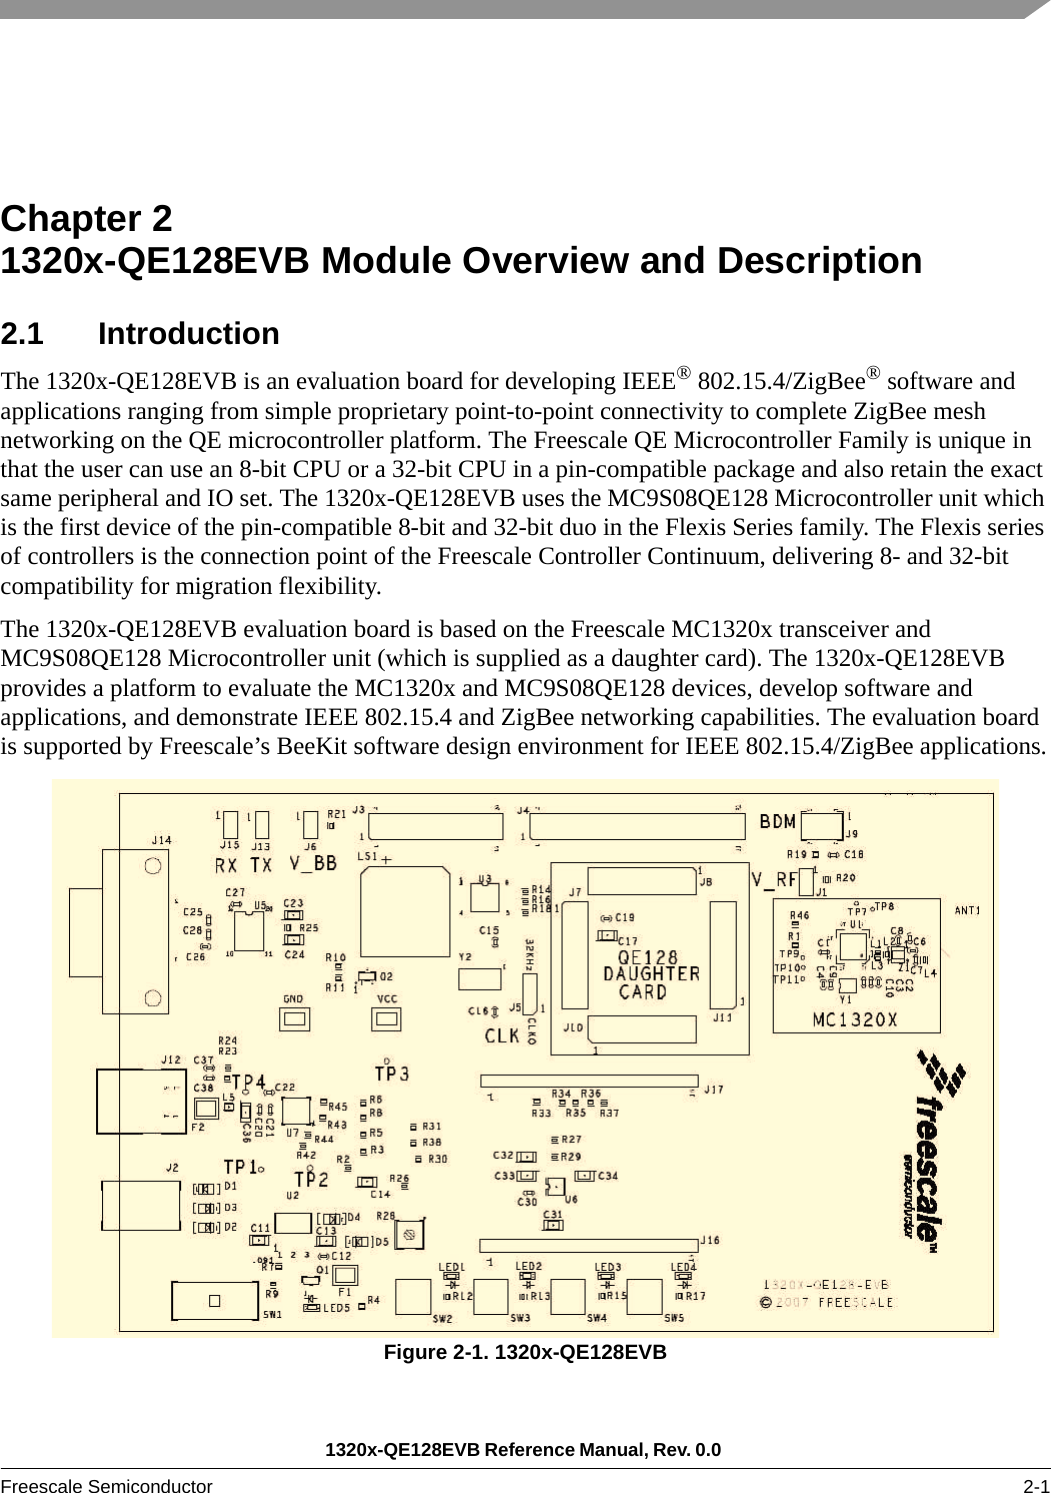 1320x-QE128EVB Reference Manual, Rev. 0.0 Freescale Semiconductor 2-1Chapter 2  1320x-QE128EVB Module Overview and Description2.1 IntroductionThe 1320x-QE128EVB is an evaluation board for developing IEEE® 802.15.4/ZigBee® software and applications ranging from simple proprietary point-to-point connectivity to complete ZigBee mesh networking on the QE microcontroller platform. The Freescale QE Microcontroller Family is unique in that the user can use an 8-bit CPU or a 32-bit CPU in a pin-compatible package and also retain the exact same peripheral and IO set. The 1320x-QE128EVB uses the MC9S08QE128 Microcontroller unit which is the first device of the pin-compatible 8-bit and 32-bit duo in the Flexis Series family. The Flexis series of controllers is the connection point of the Freescale Controller Continuum, delivering 8- and 32-bit compatibility for migration flexibility.The 1320x-QE128EVB evaluation board is based on the Freescale MC1320x transceiver and MC9S08QE128 Microcontroller unit (which is supplied as a daughter card). The 1320x-QE128EVB provides a platform to evaluate the MC1320x and MC9S08QE128 devices, develop software and applications, and demonstrate IEEE 802.15.4 and ZigBee networking capabilities. The evaluation board is supported by Freescale’s BeeKit software design environment for IEEE 802.15.4/ZigBee applications.Figure 2-1. 1320x-QE128EVB  